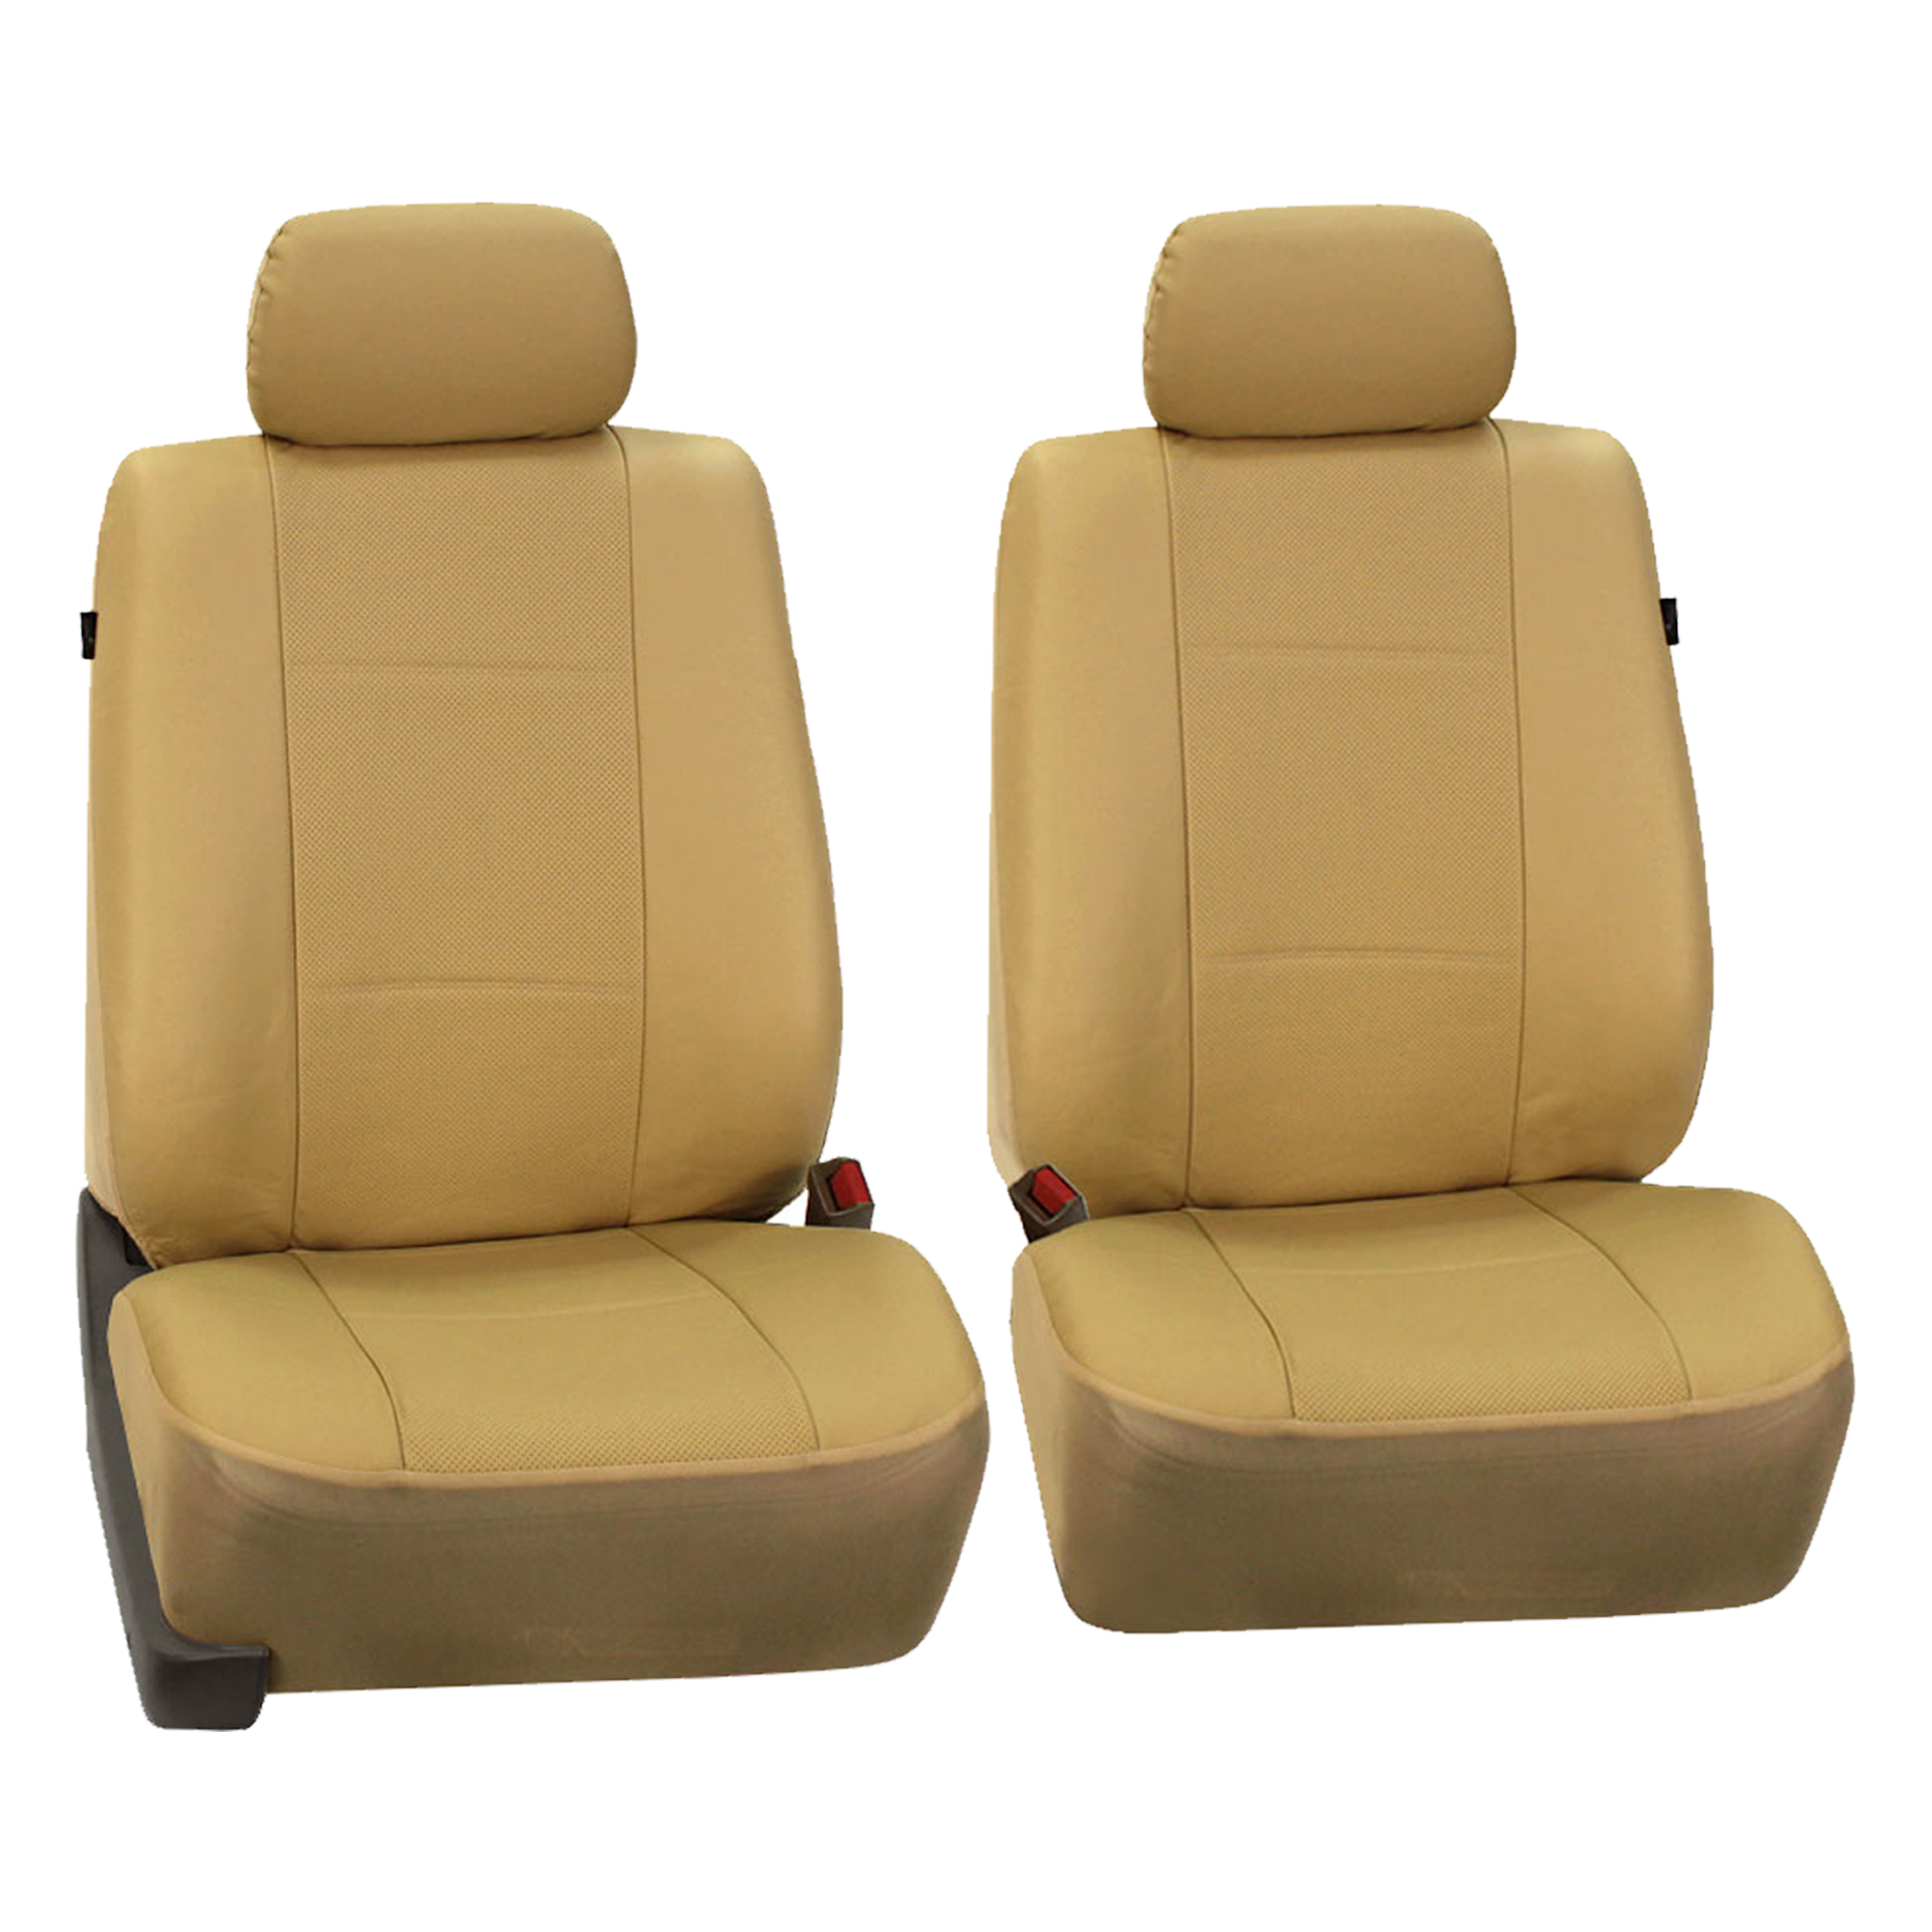 FH Group Beige Deluxe Faux Leather Airbag Compatible and Split Bench Car Seat Covers, 8 Seater 3 Row Full Set - image 2 of 6